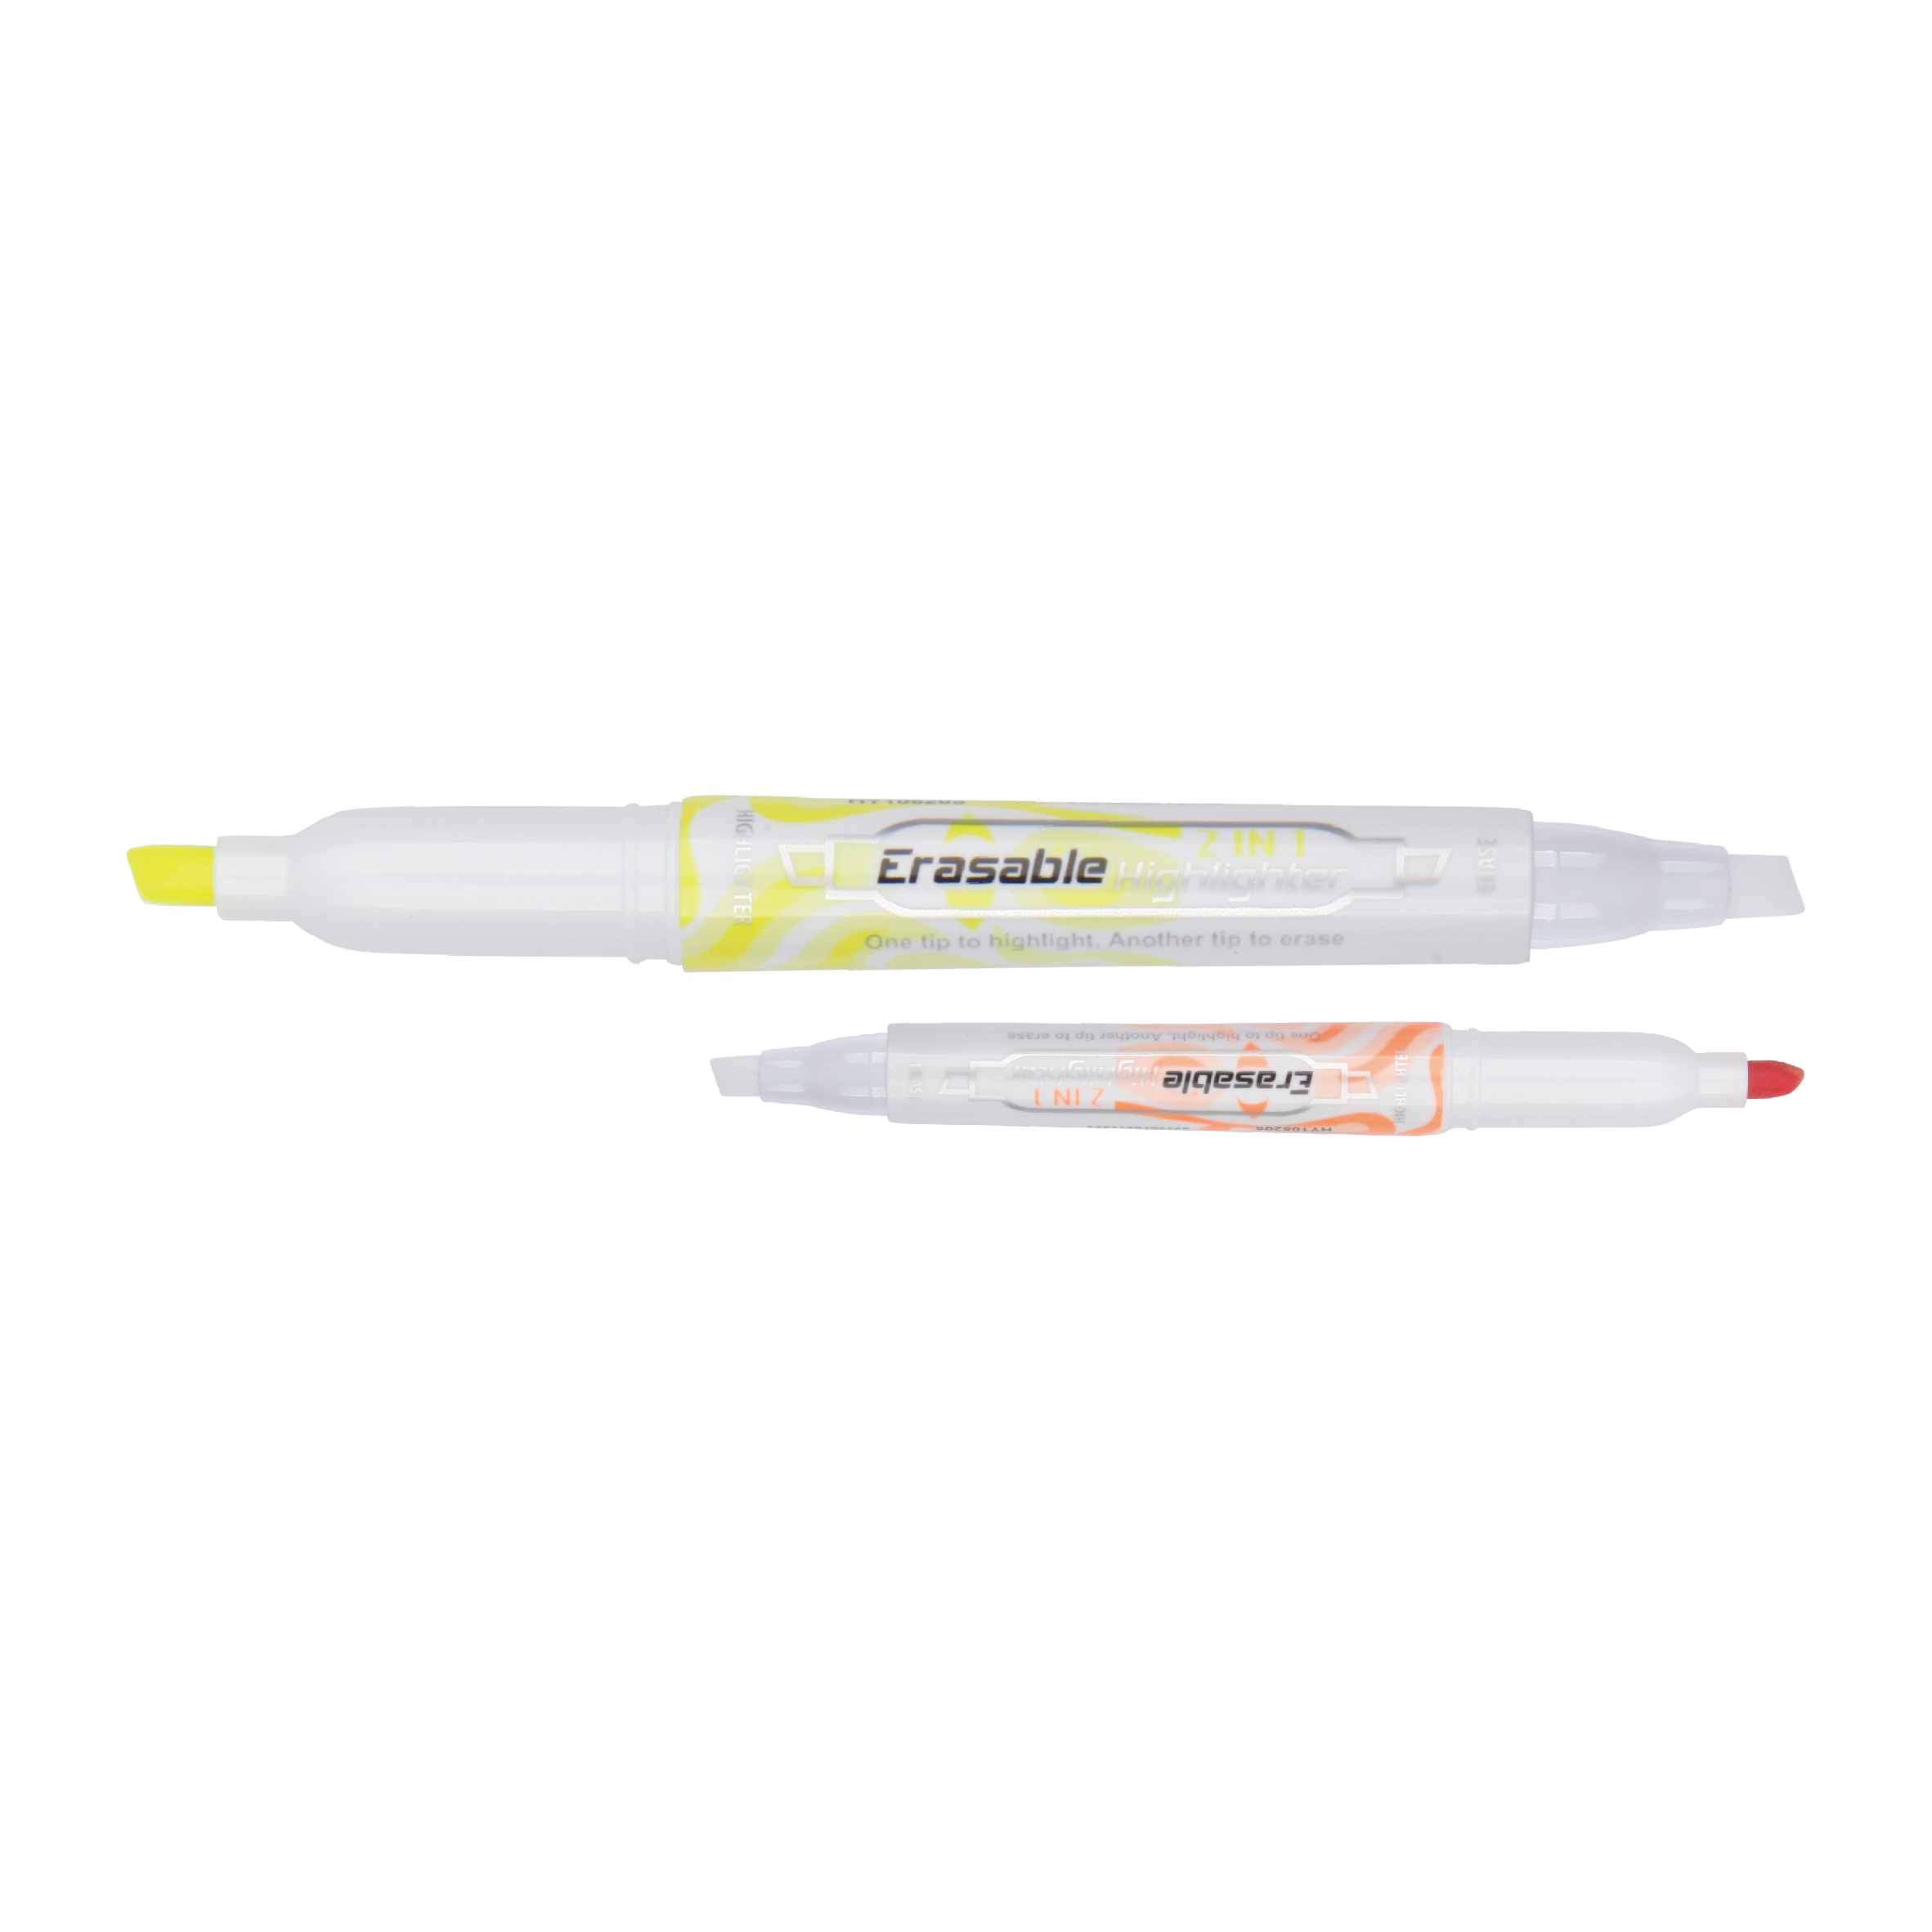 Dual-tip Erasable Highlighter with Assorted Colors 5 Count